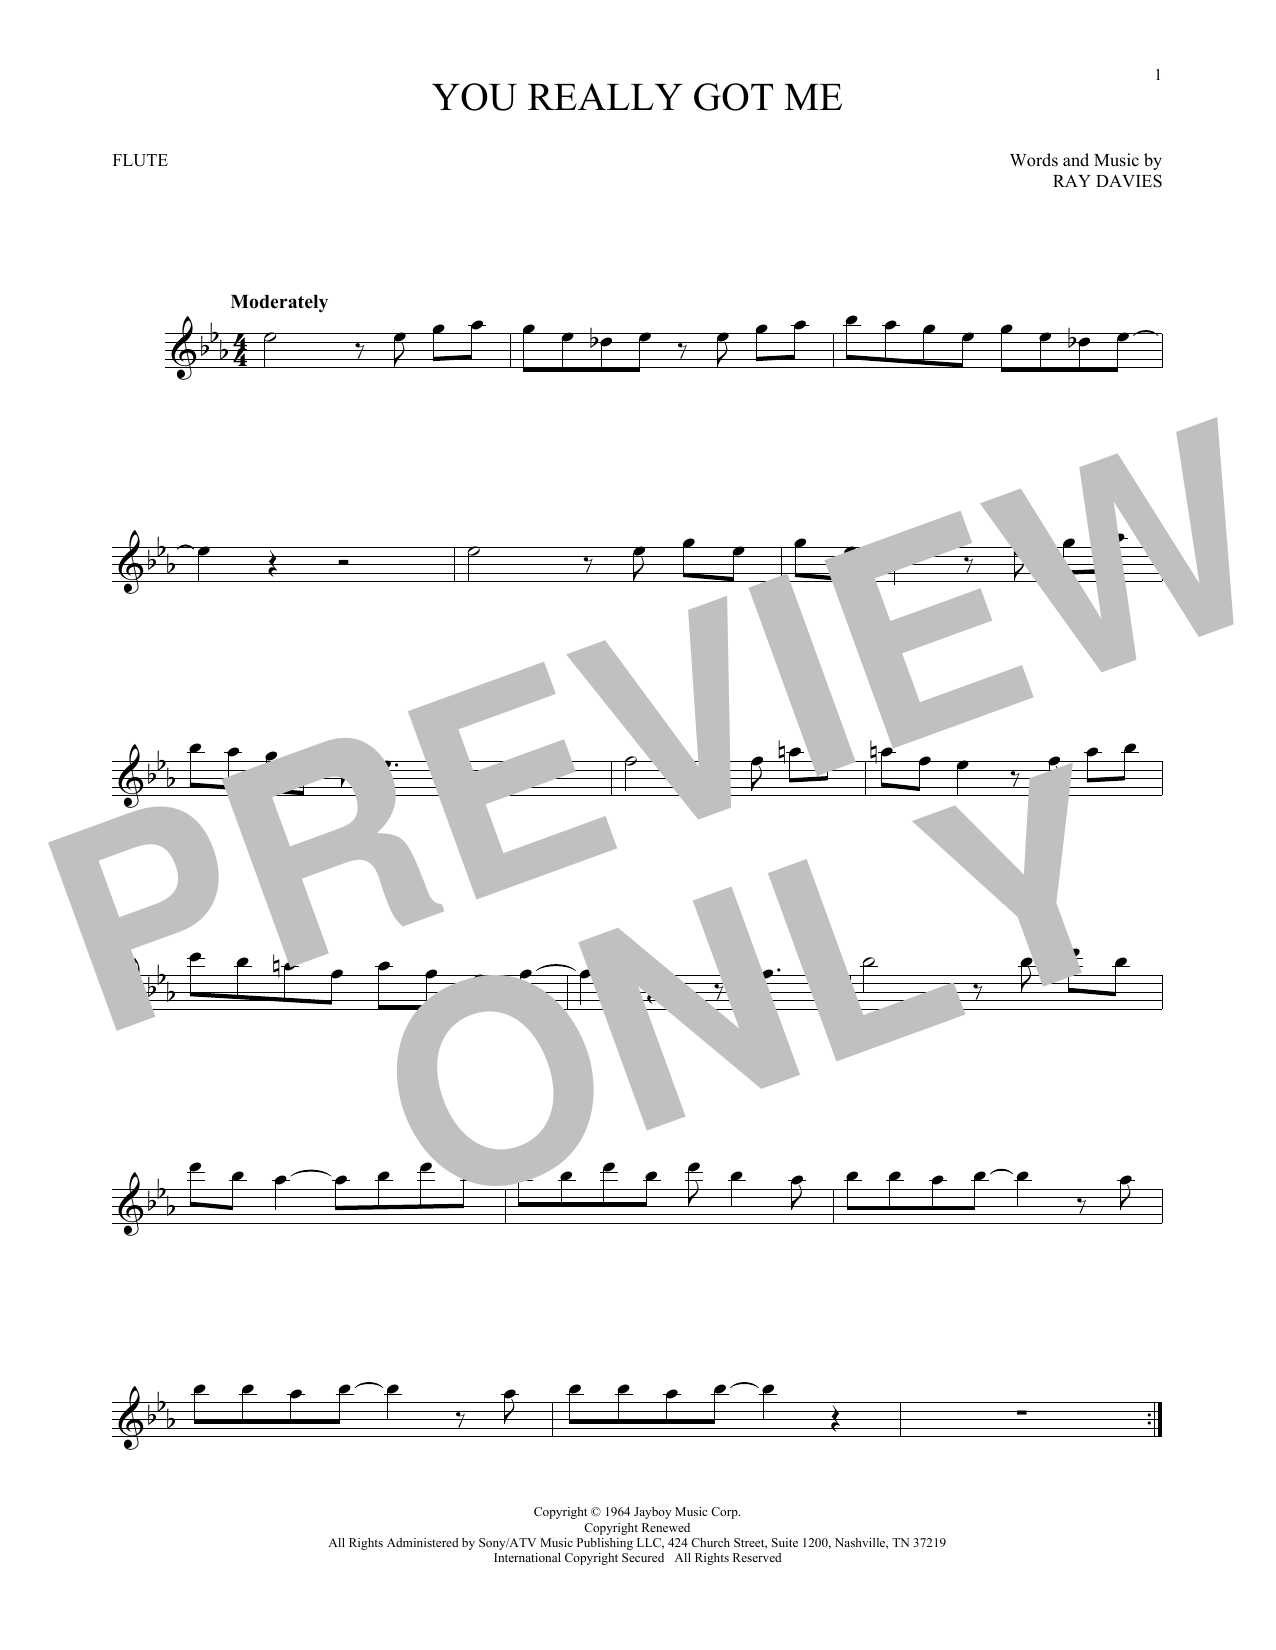 Download The Kinks You Really Got Me Sheet Music